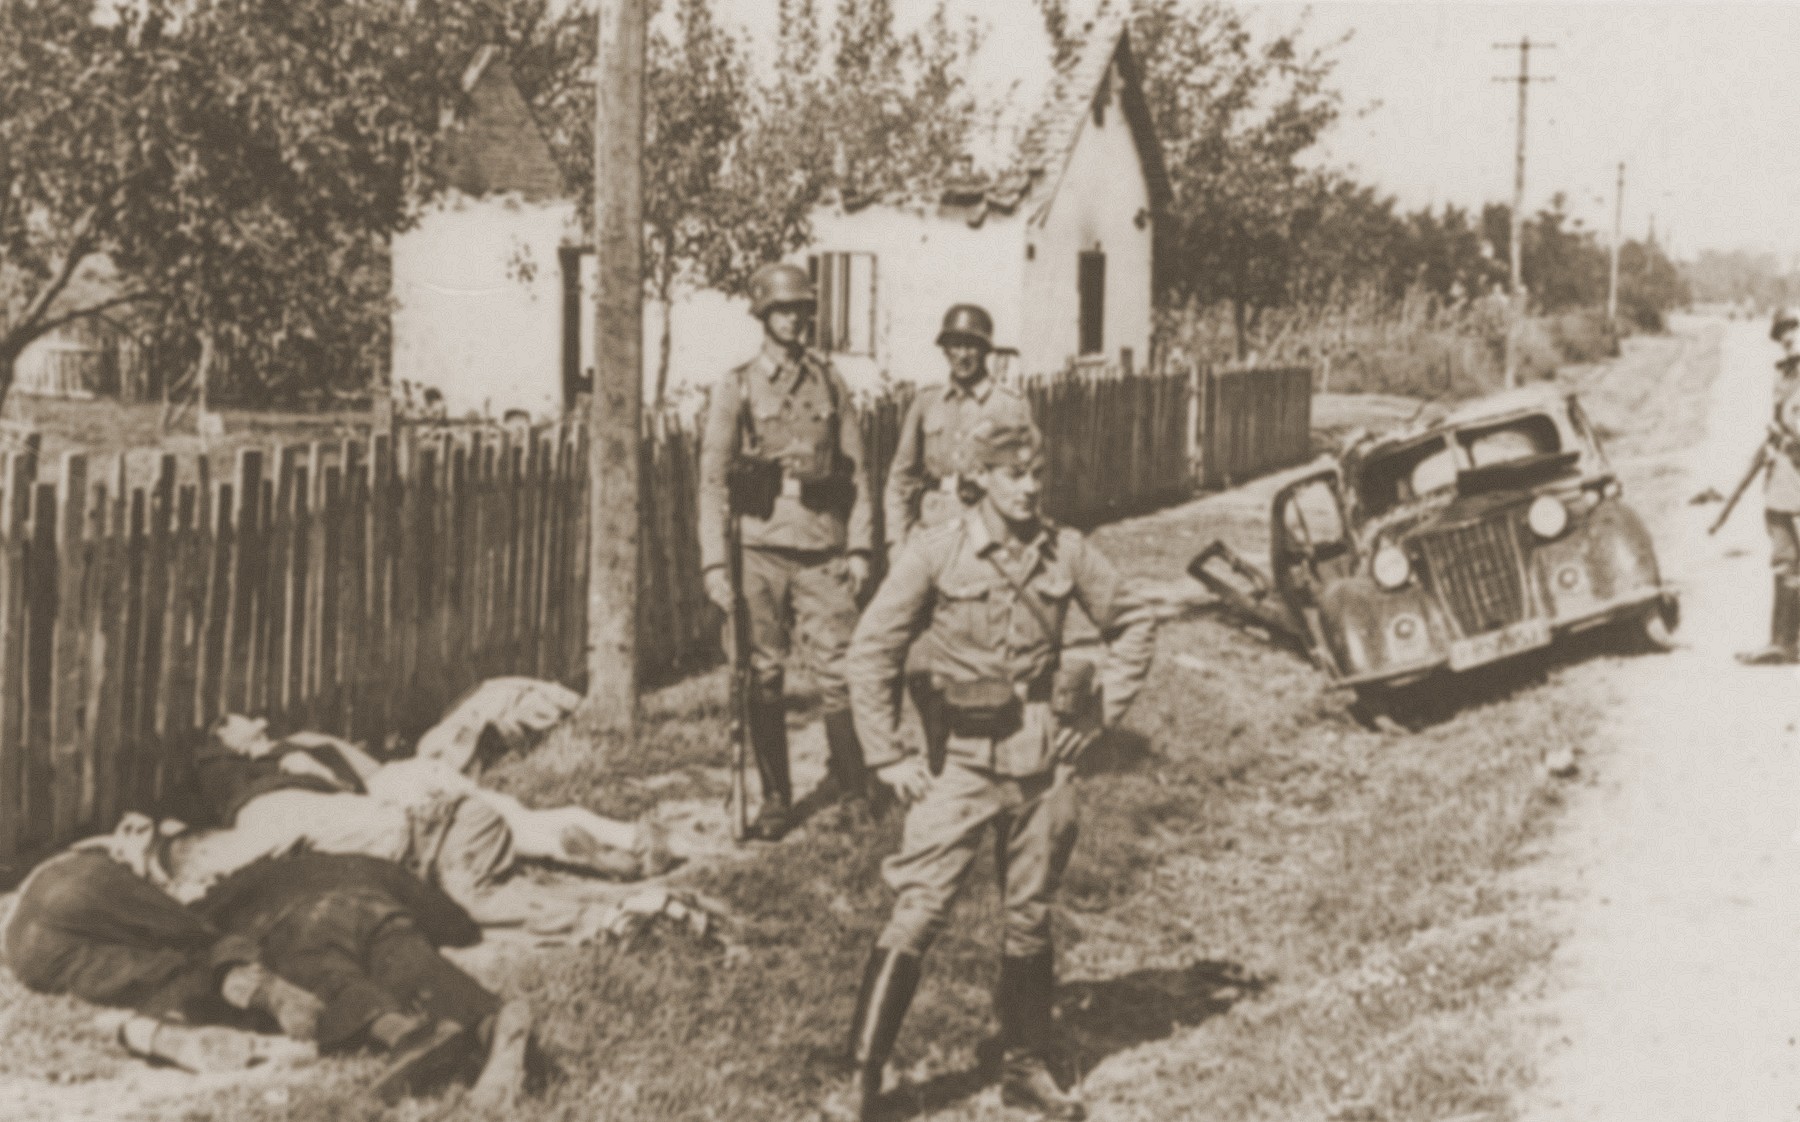 German police stand near the bodies of recently executed Serbian civilians.